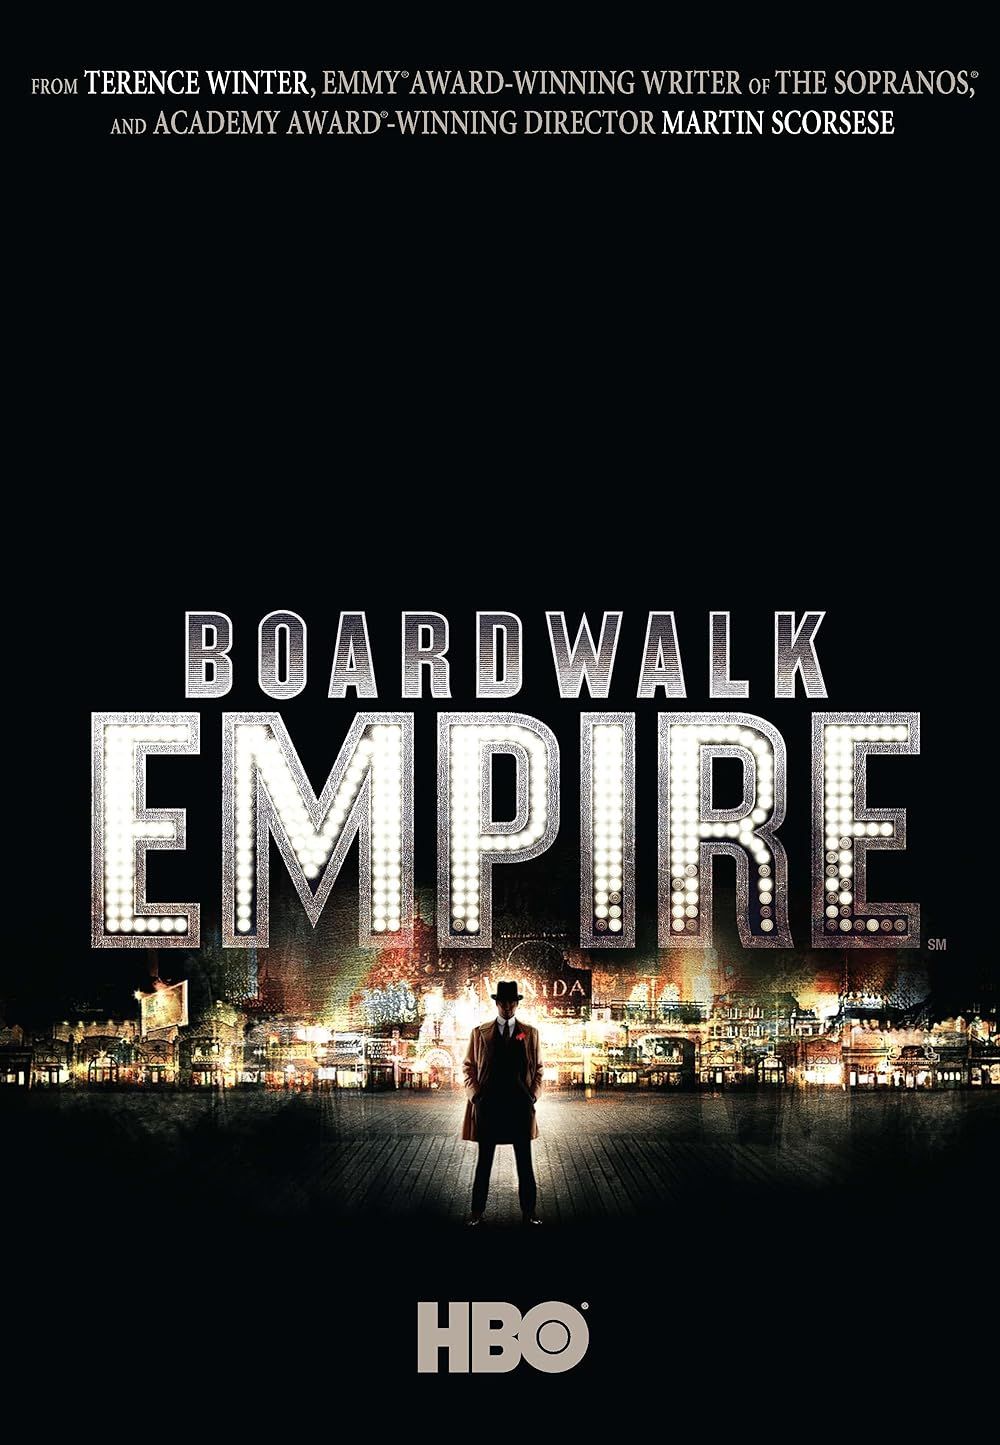 Poster of Boardwalk Empire with a man in front of the logo